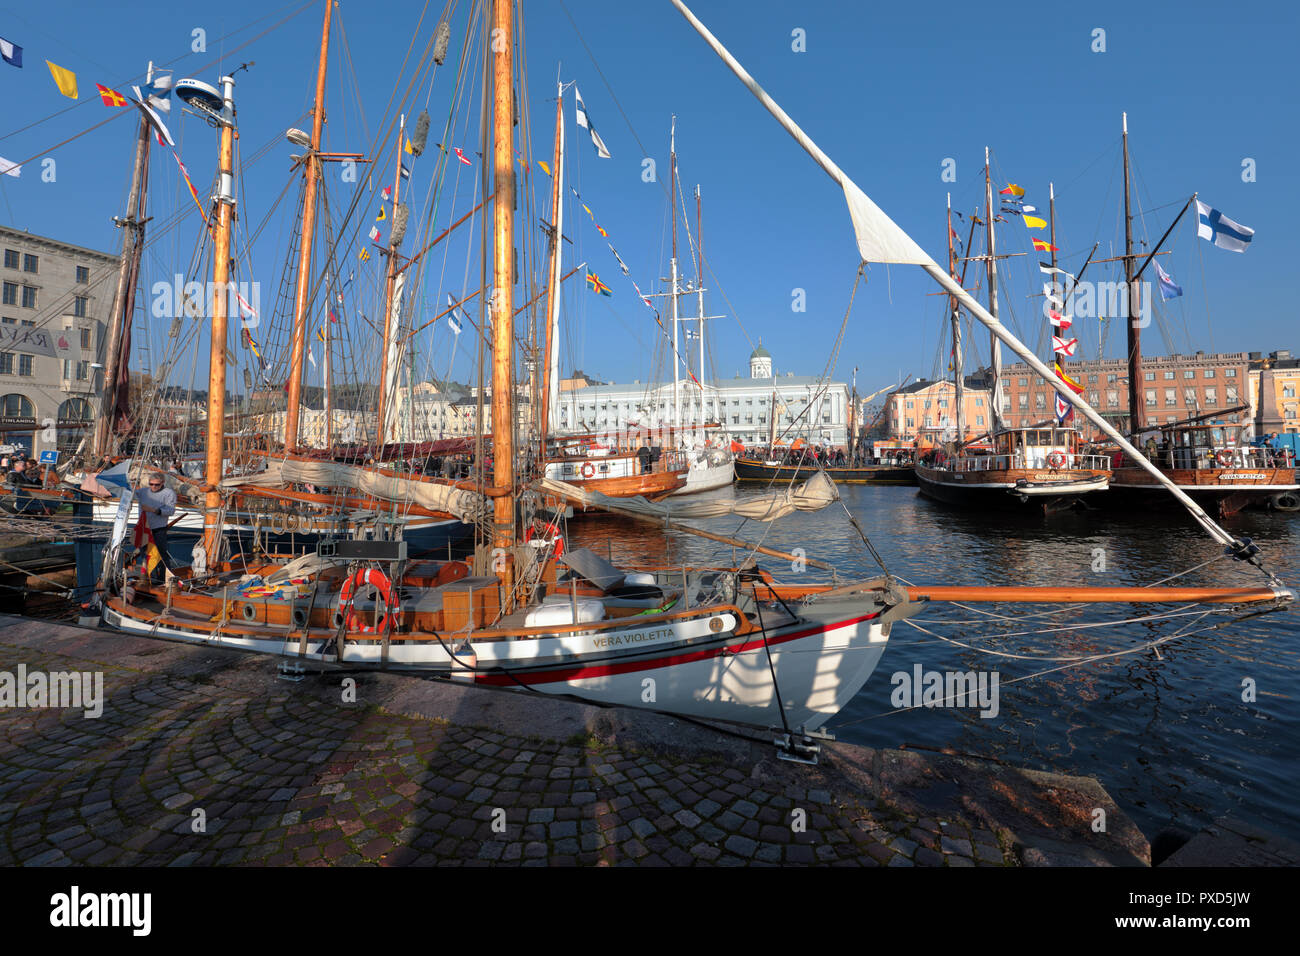 Helsinki, Finland - October 14, 2018: People visiting historic ships during Traditional Sailing Day 2018. In second Sunday of October tourists may vis Stock Photo